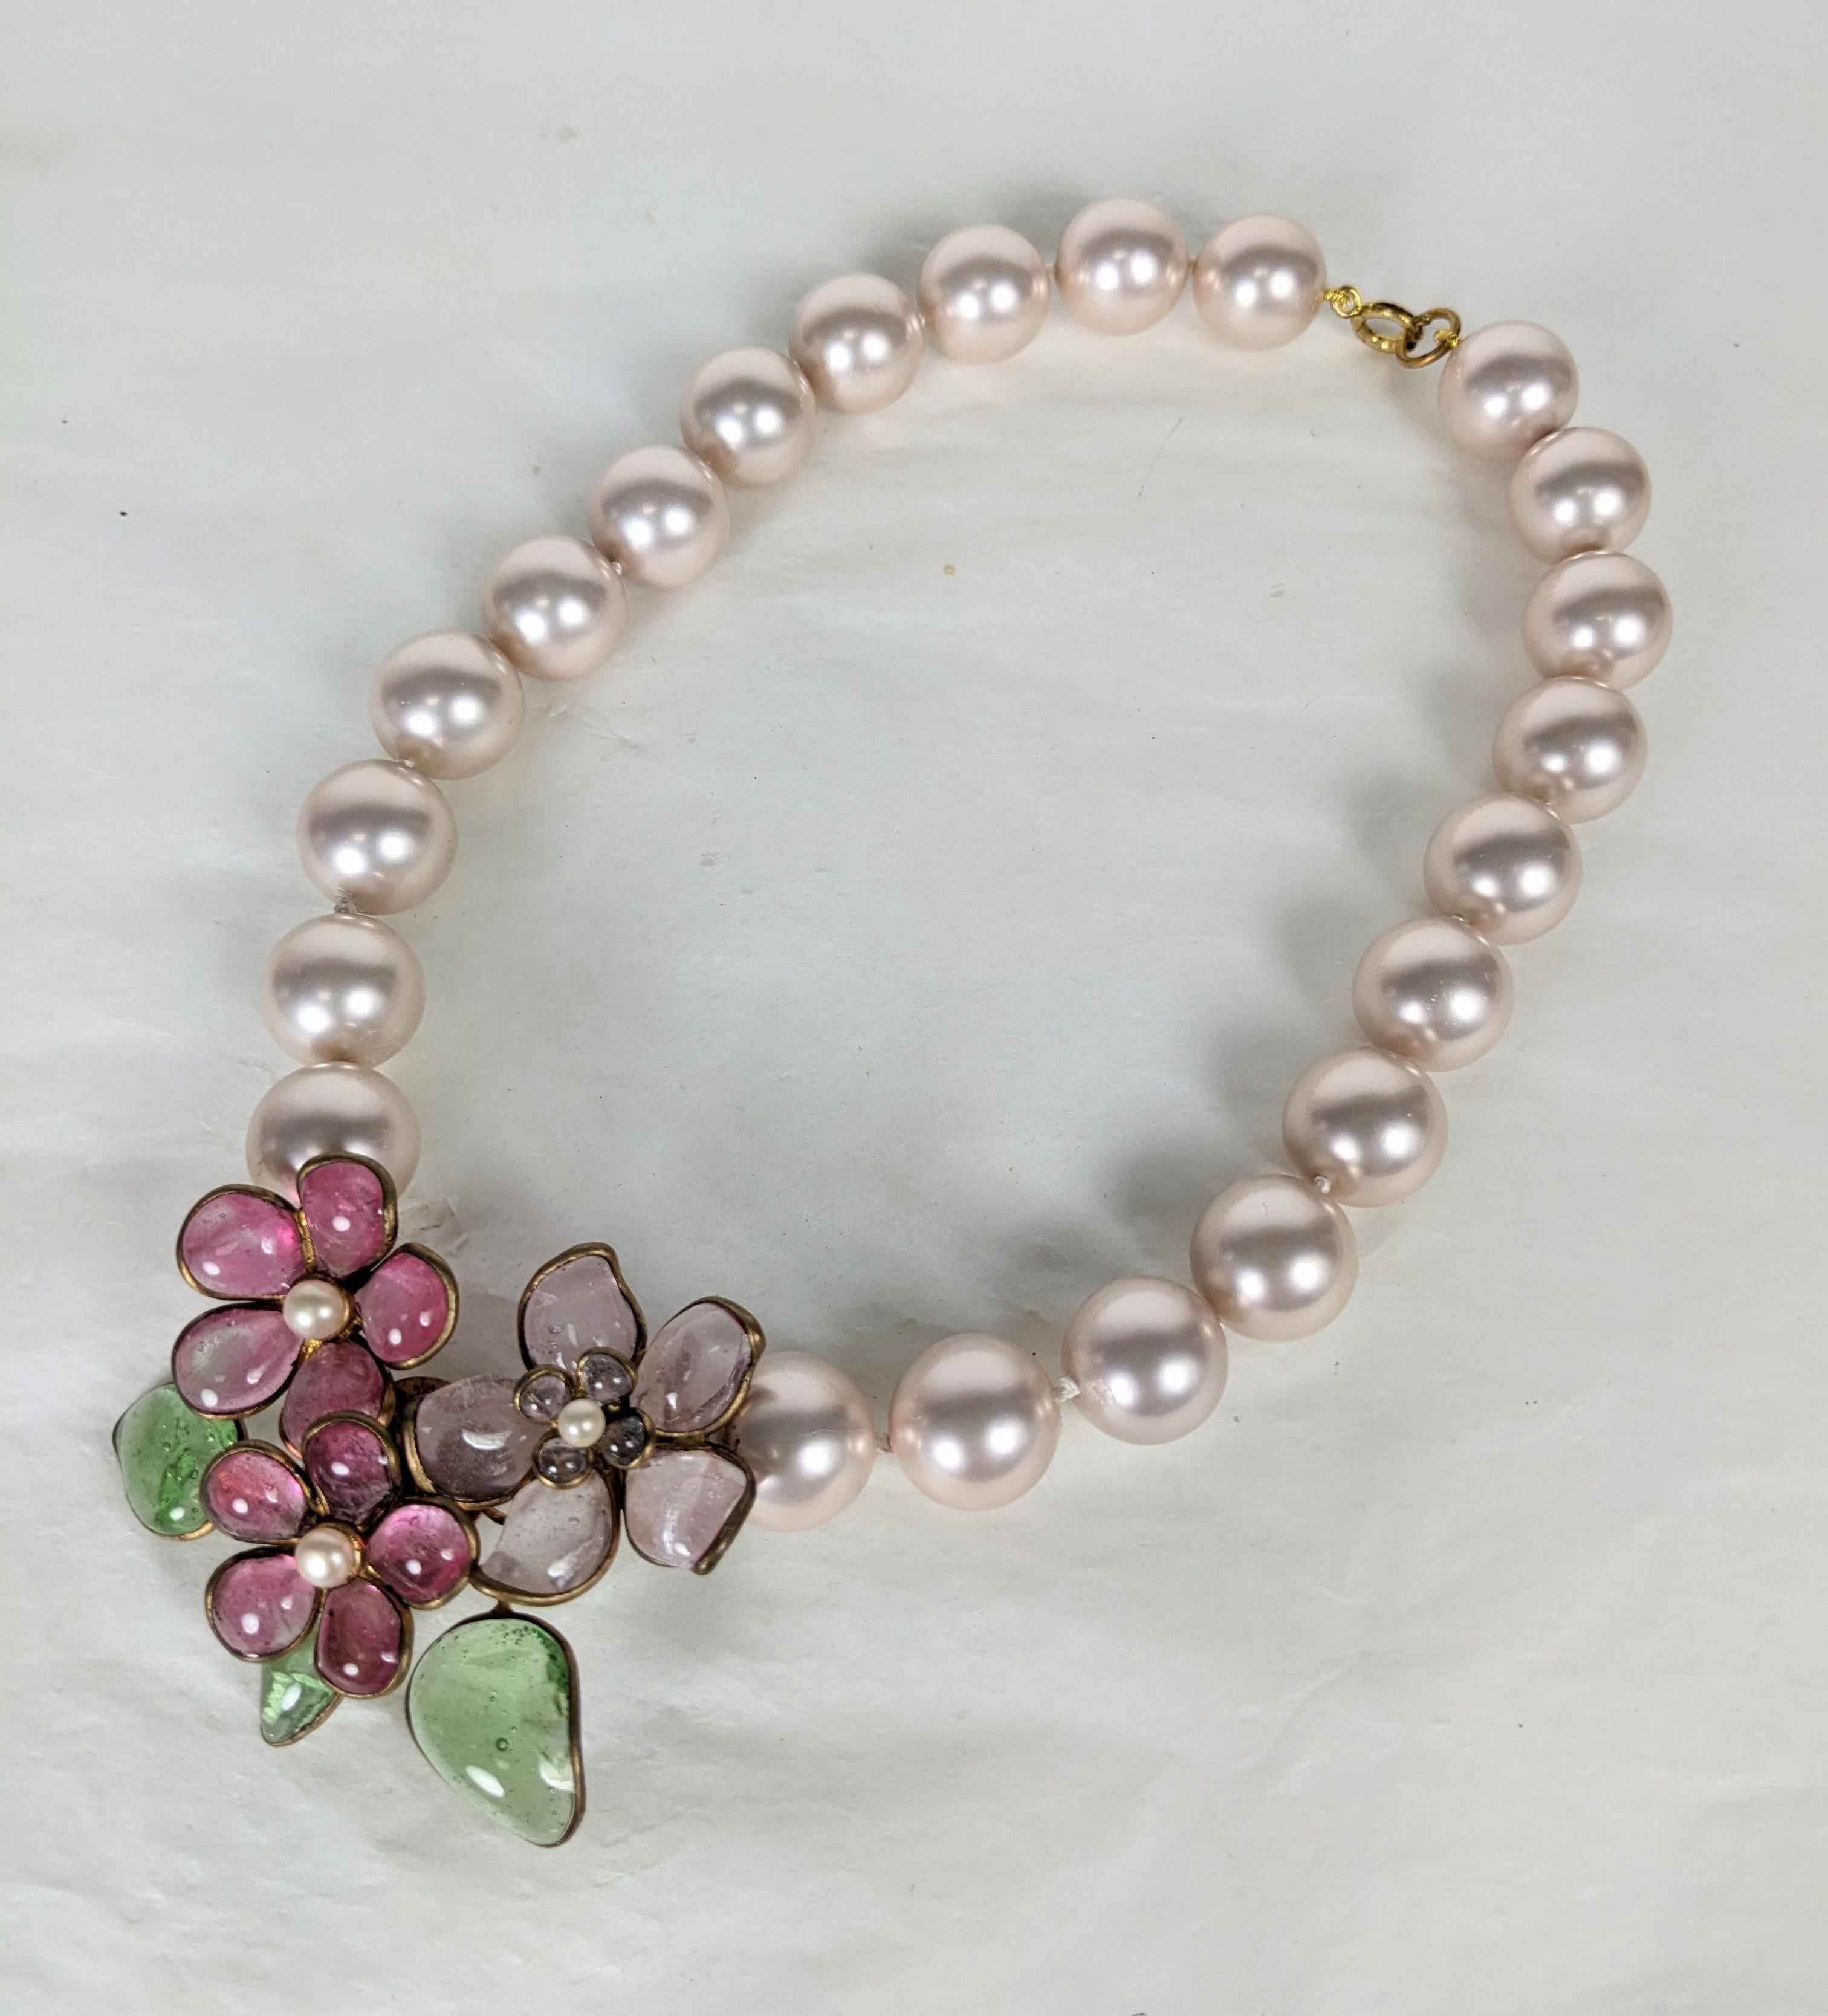 CoCo Chanel Maison Gripoix  Flower Necklace circa 1960. Of pink Gripoix hand knotted faux pearls with a floral centerpiece of poured Gripoix glass enamel florals in pink, amythest and pale emerald leaves with faux pearl cabochons. Excellent